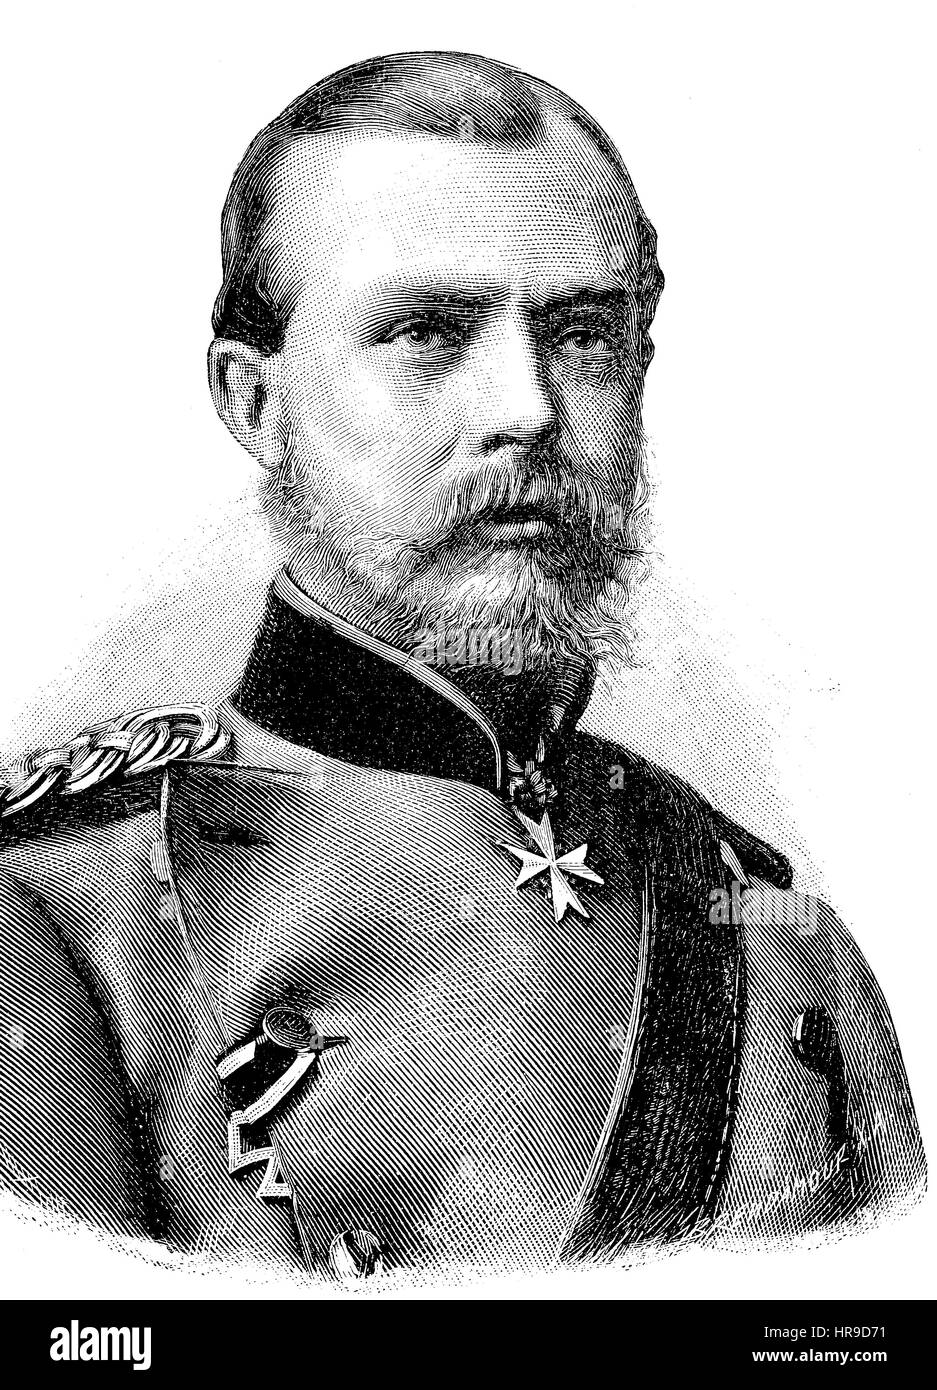 Prince Friedrich Wilhelm Nikolaus Albrecht of Prussia, 1837 - 1906, was a Prussian general field marshal, Herrenmeister, Grand Master of the Order of Saint John from 1883 until his death, and regent of the Duchy of Brunswick from 1885, Situation from the time of The Franco-Prussian War or Franco-German War,  Deutsch-Franzoesischer Krieg, 1870-1871, Reproduction of an original woodcut from the year 1885, digital improved Stock Photo